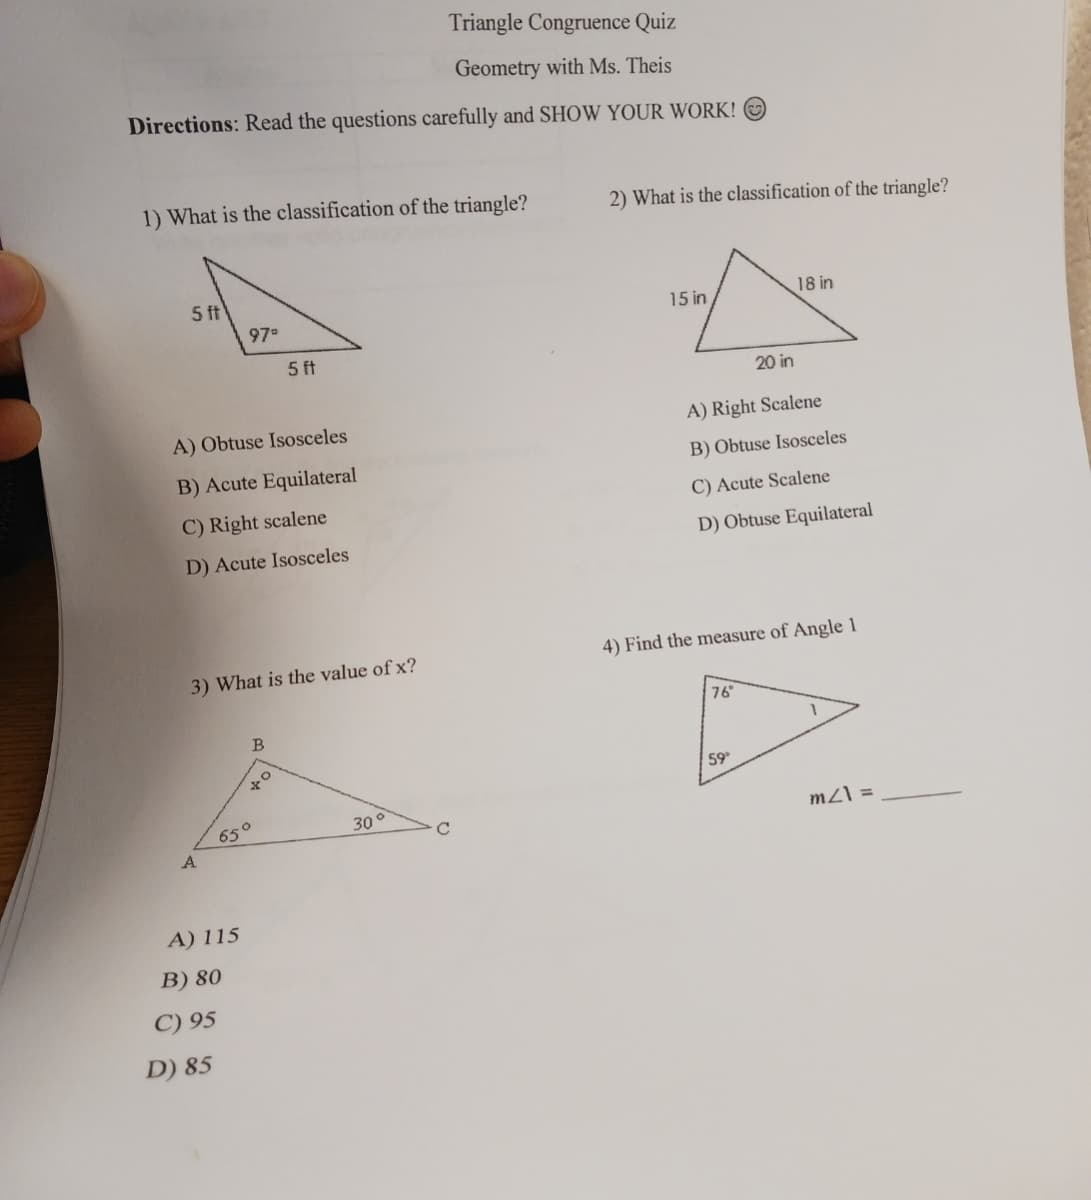 Triangle Congruence Quiz
Geometry with Ms. Theis
Directions: Read the questions carefully and SHOW YOUR WORK!
1) What is the classification of the triangle?
2) What is the classification of the triangle?
5 ft
15 in
18 in
97
5 ft
20 in
A) Obtuse Isosceles
A) Right Scalene
B) Acute Equilateral
B) Obtuse Isosceles
C) Right scalene
C) Acute Scalene
D) Acute Isosceles
D) Obtuse Equilateral
4) Find the measure of Angle 1
3) What is the value of x?
76
B
59
65°
A
30°
mZ\ =
A) 115
B) 80
C) 95
D) 85
